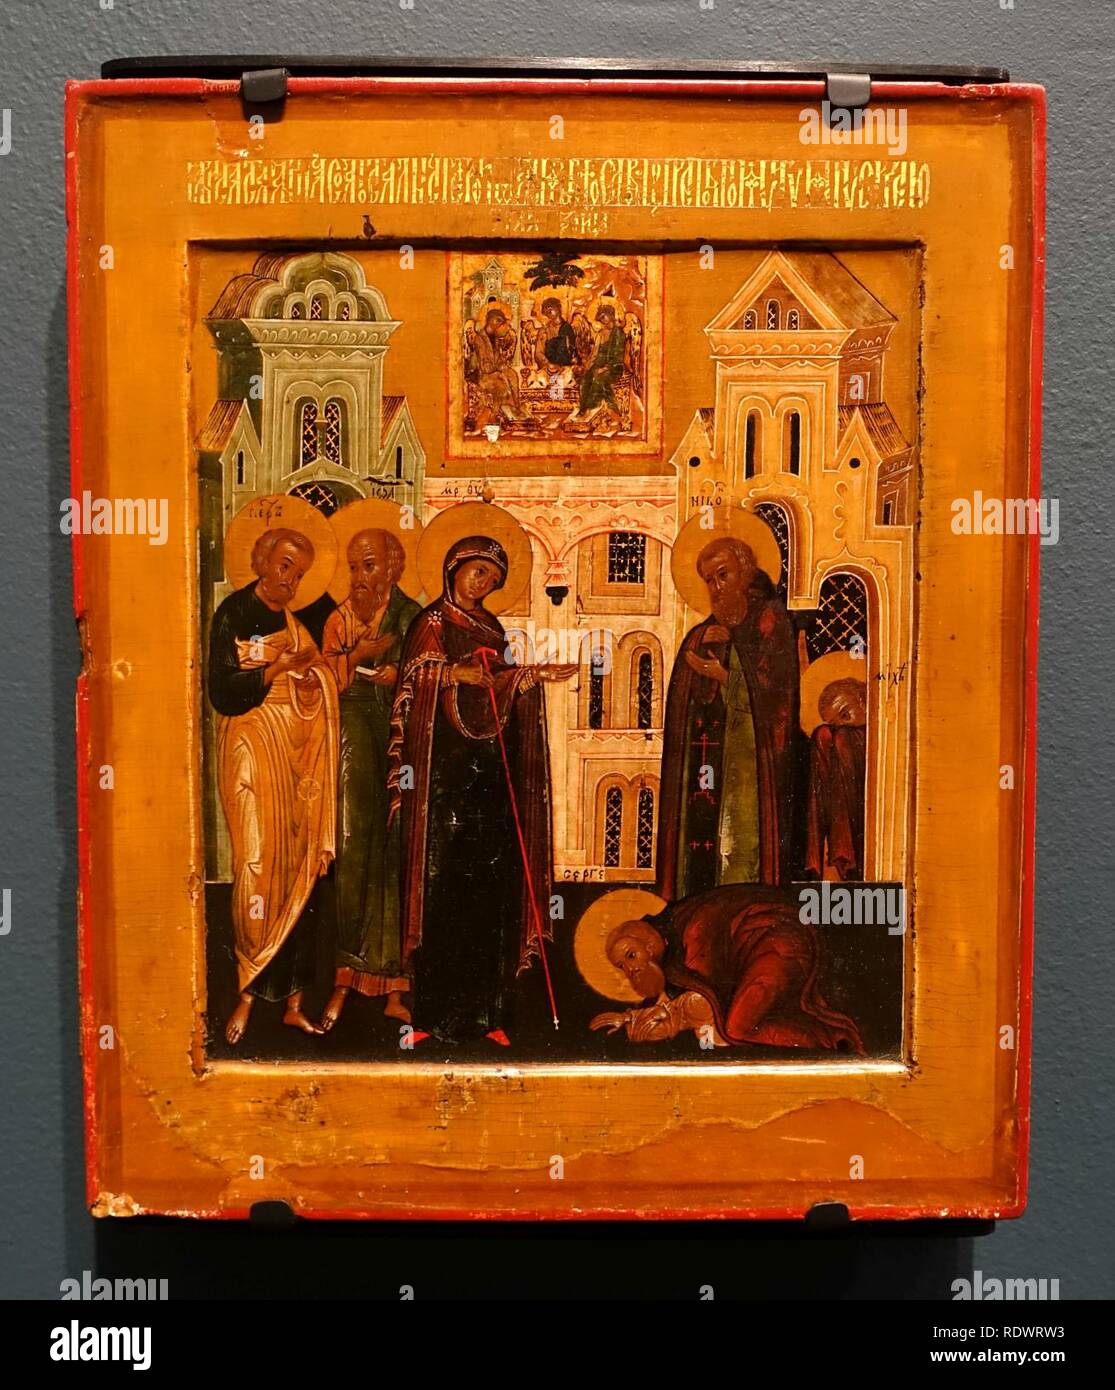 Apparition of the Mother of God to Saint Sergius of Rodonezh, late 1500s, egg tempera on wood - Jordan Schnitzer Stock Photo